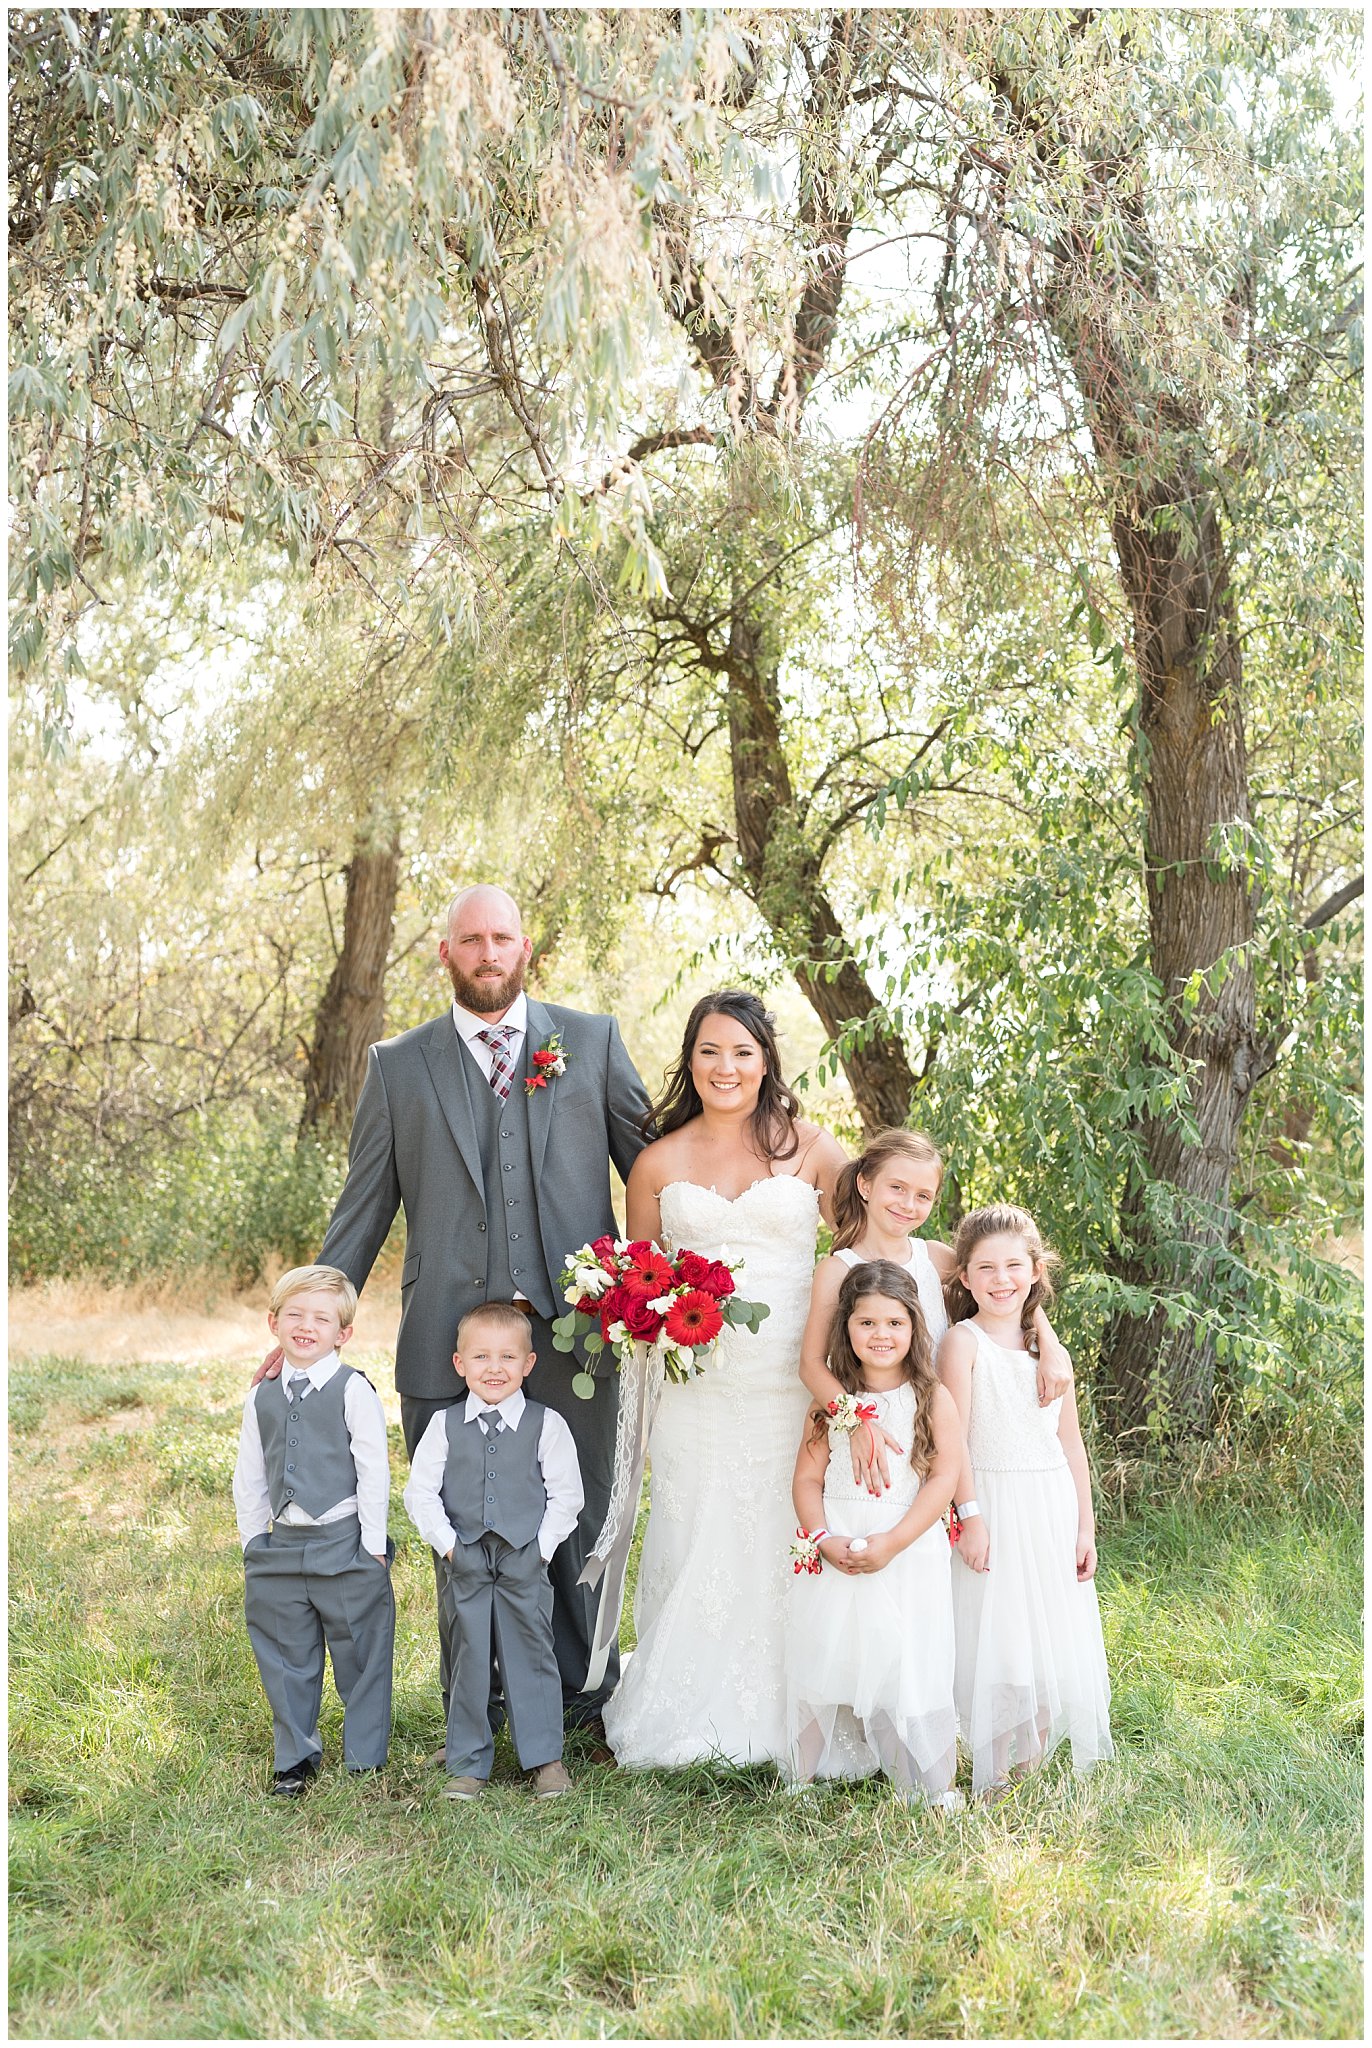 Red and white outdoor wedding | Bride and groom, ring bearers, and flower girls | Davis County Outdoor Wedding | Jessie and Dallin Photography